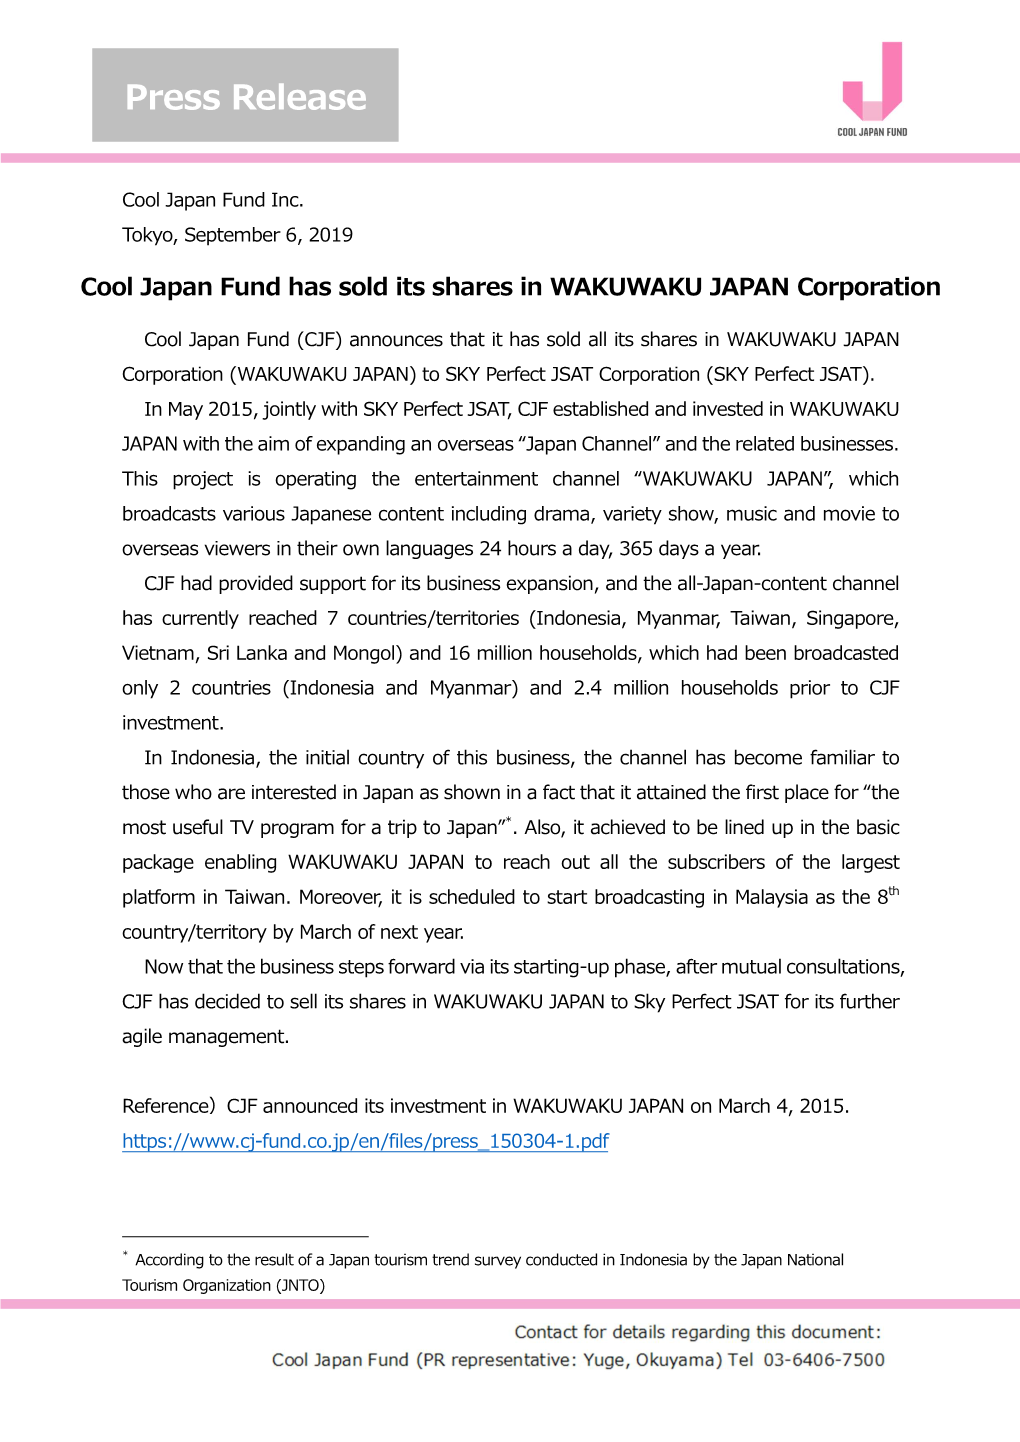 Cool Japan Fund Has Sold Its Shares in WAKUWAKU JAPAN Corporation